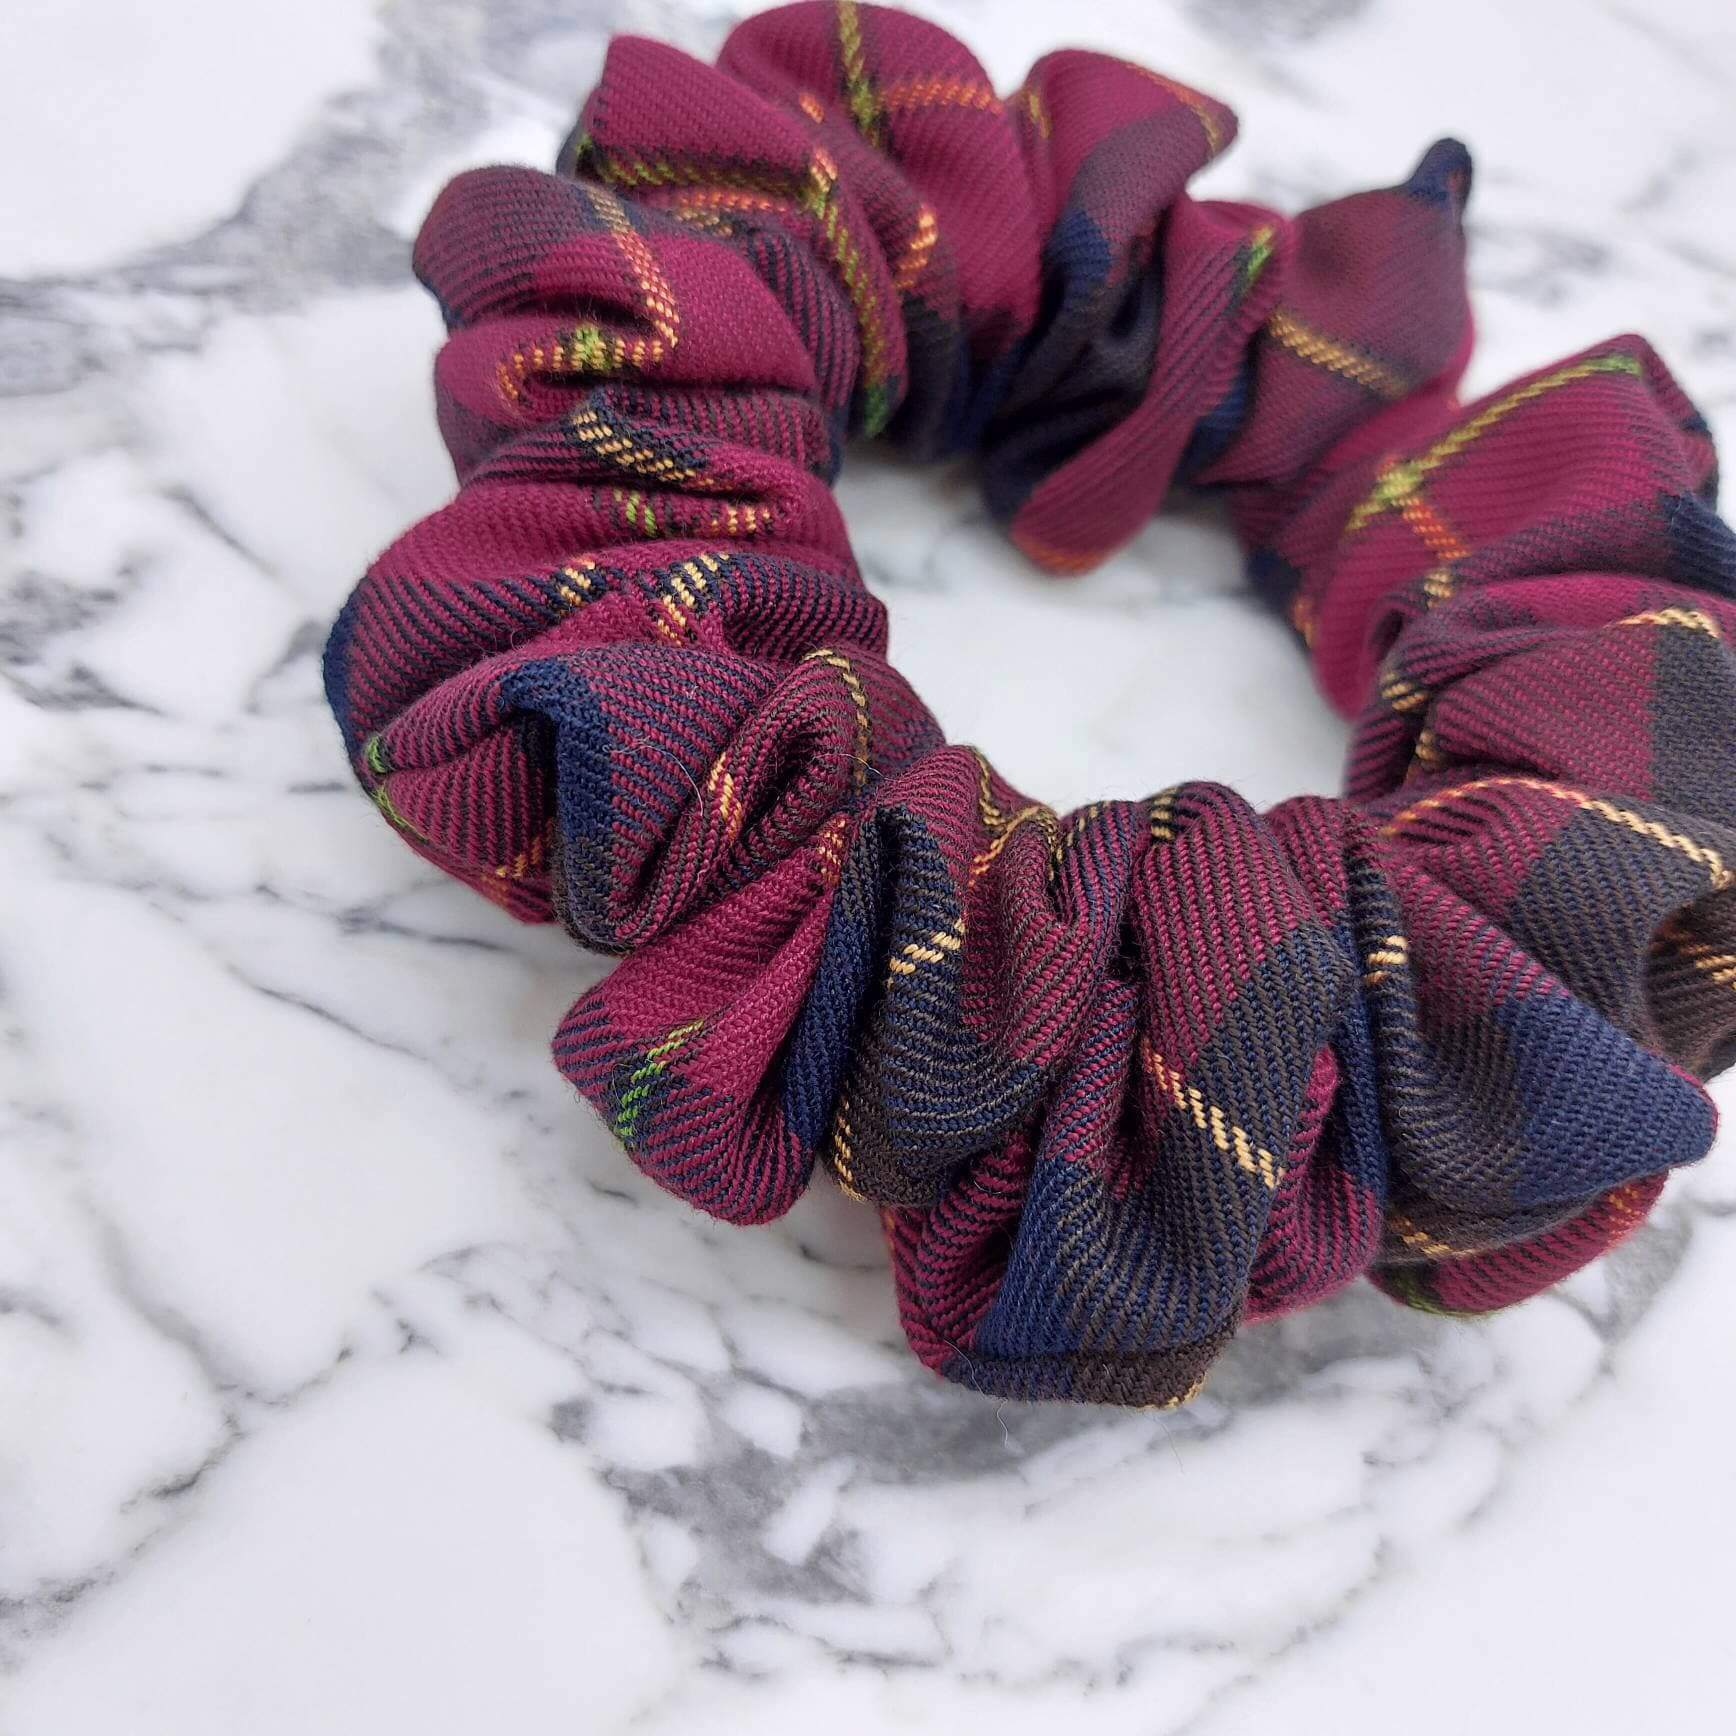 A luxury tartan check, cranberry red and brown hair scrunchie.